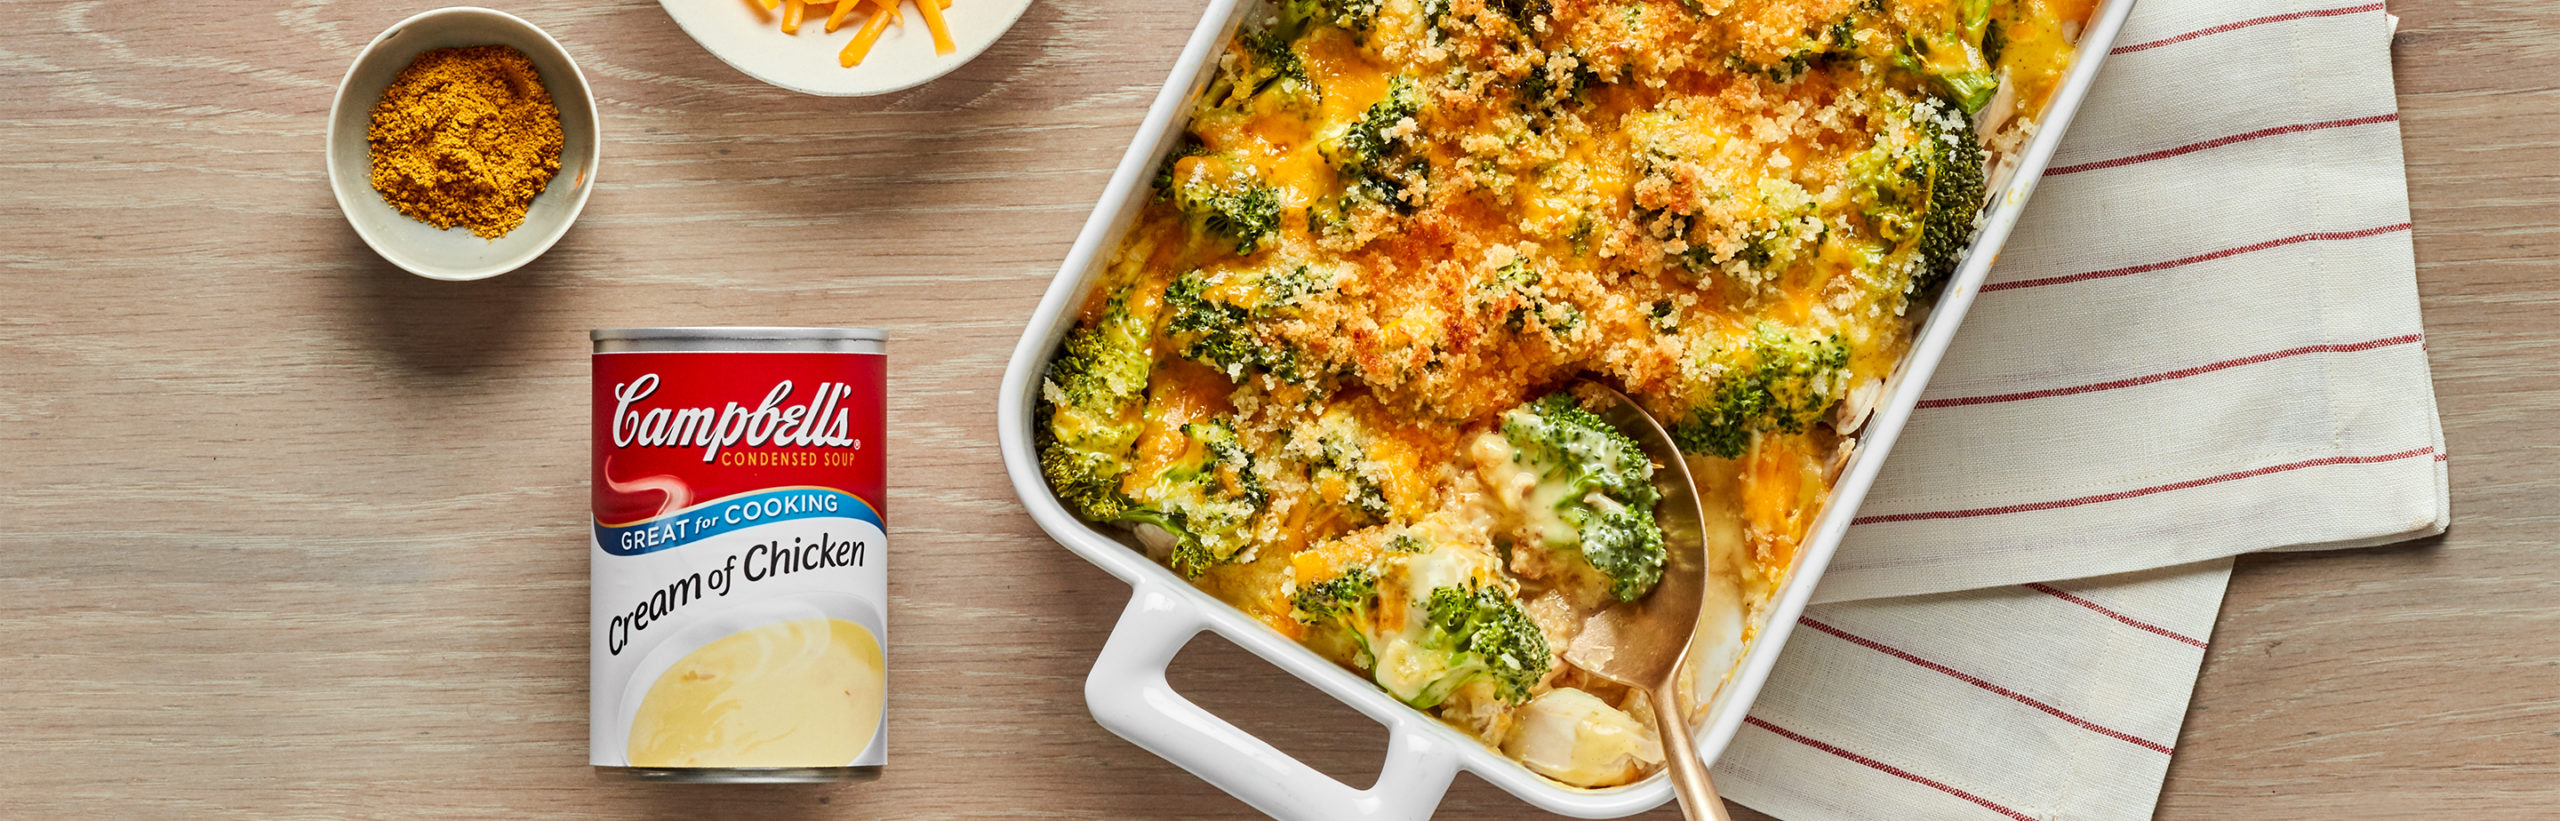 Chicken Broccoli Curry Casserole - Campbell Soup Company